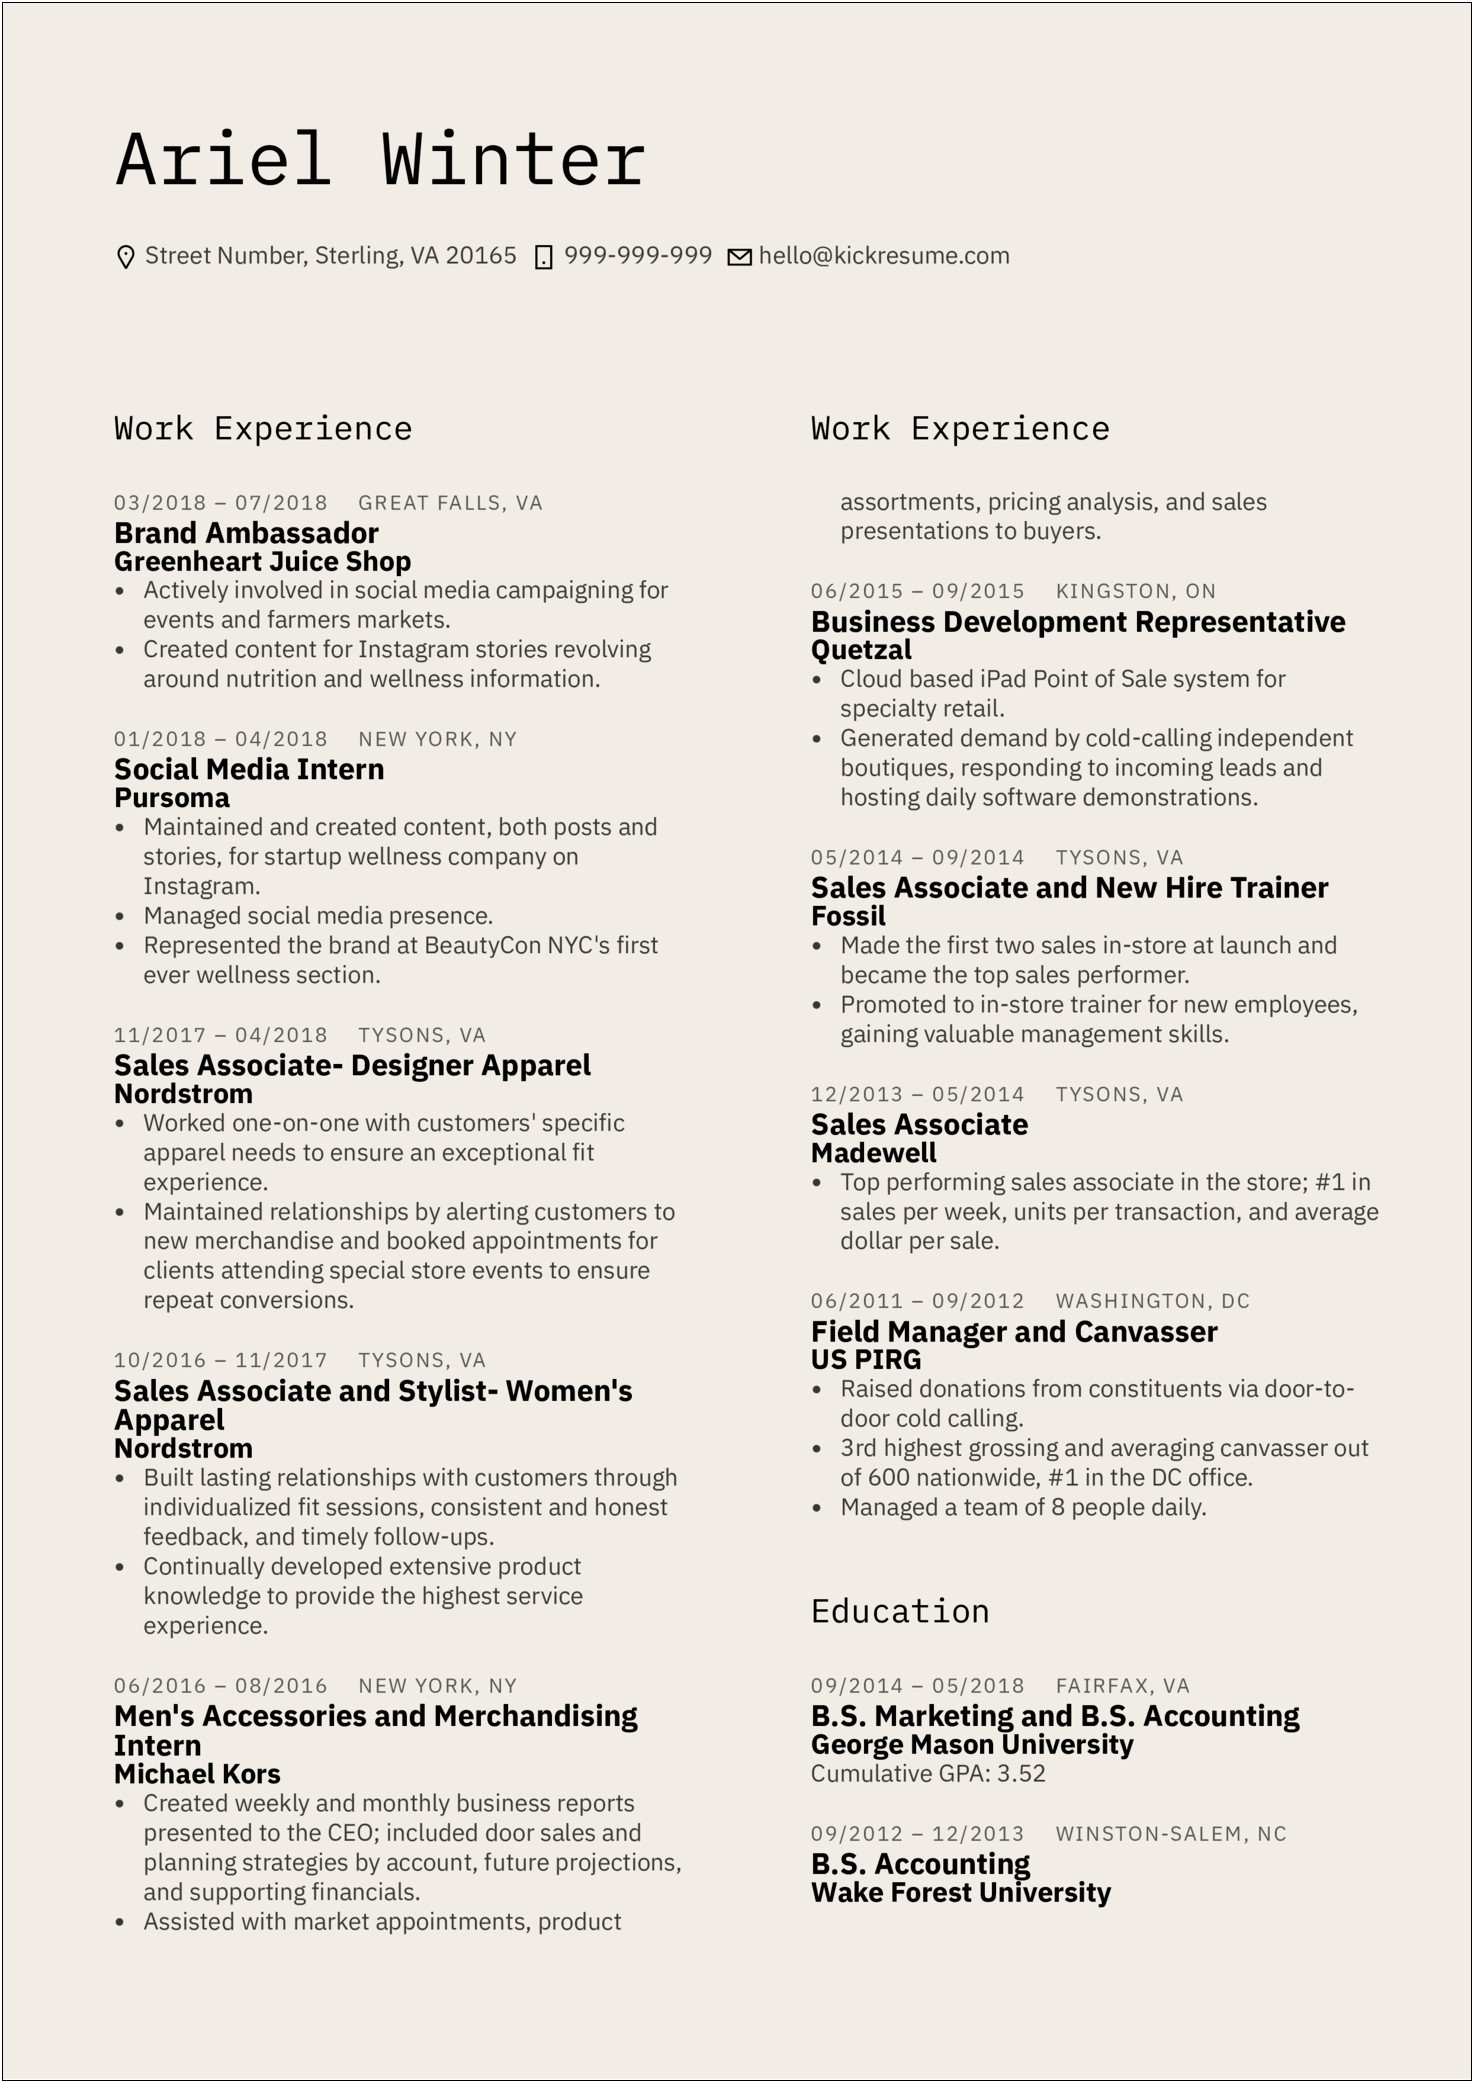 Best Place To Post Executive Resume